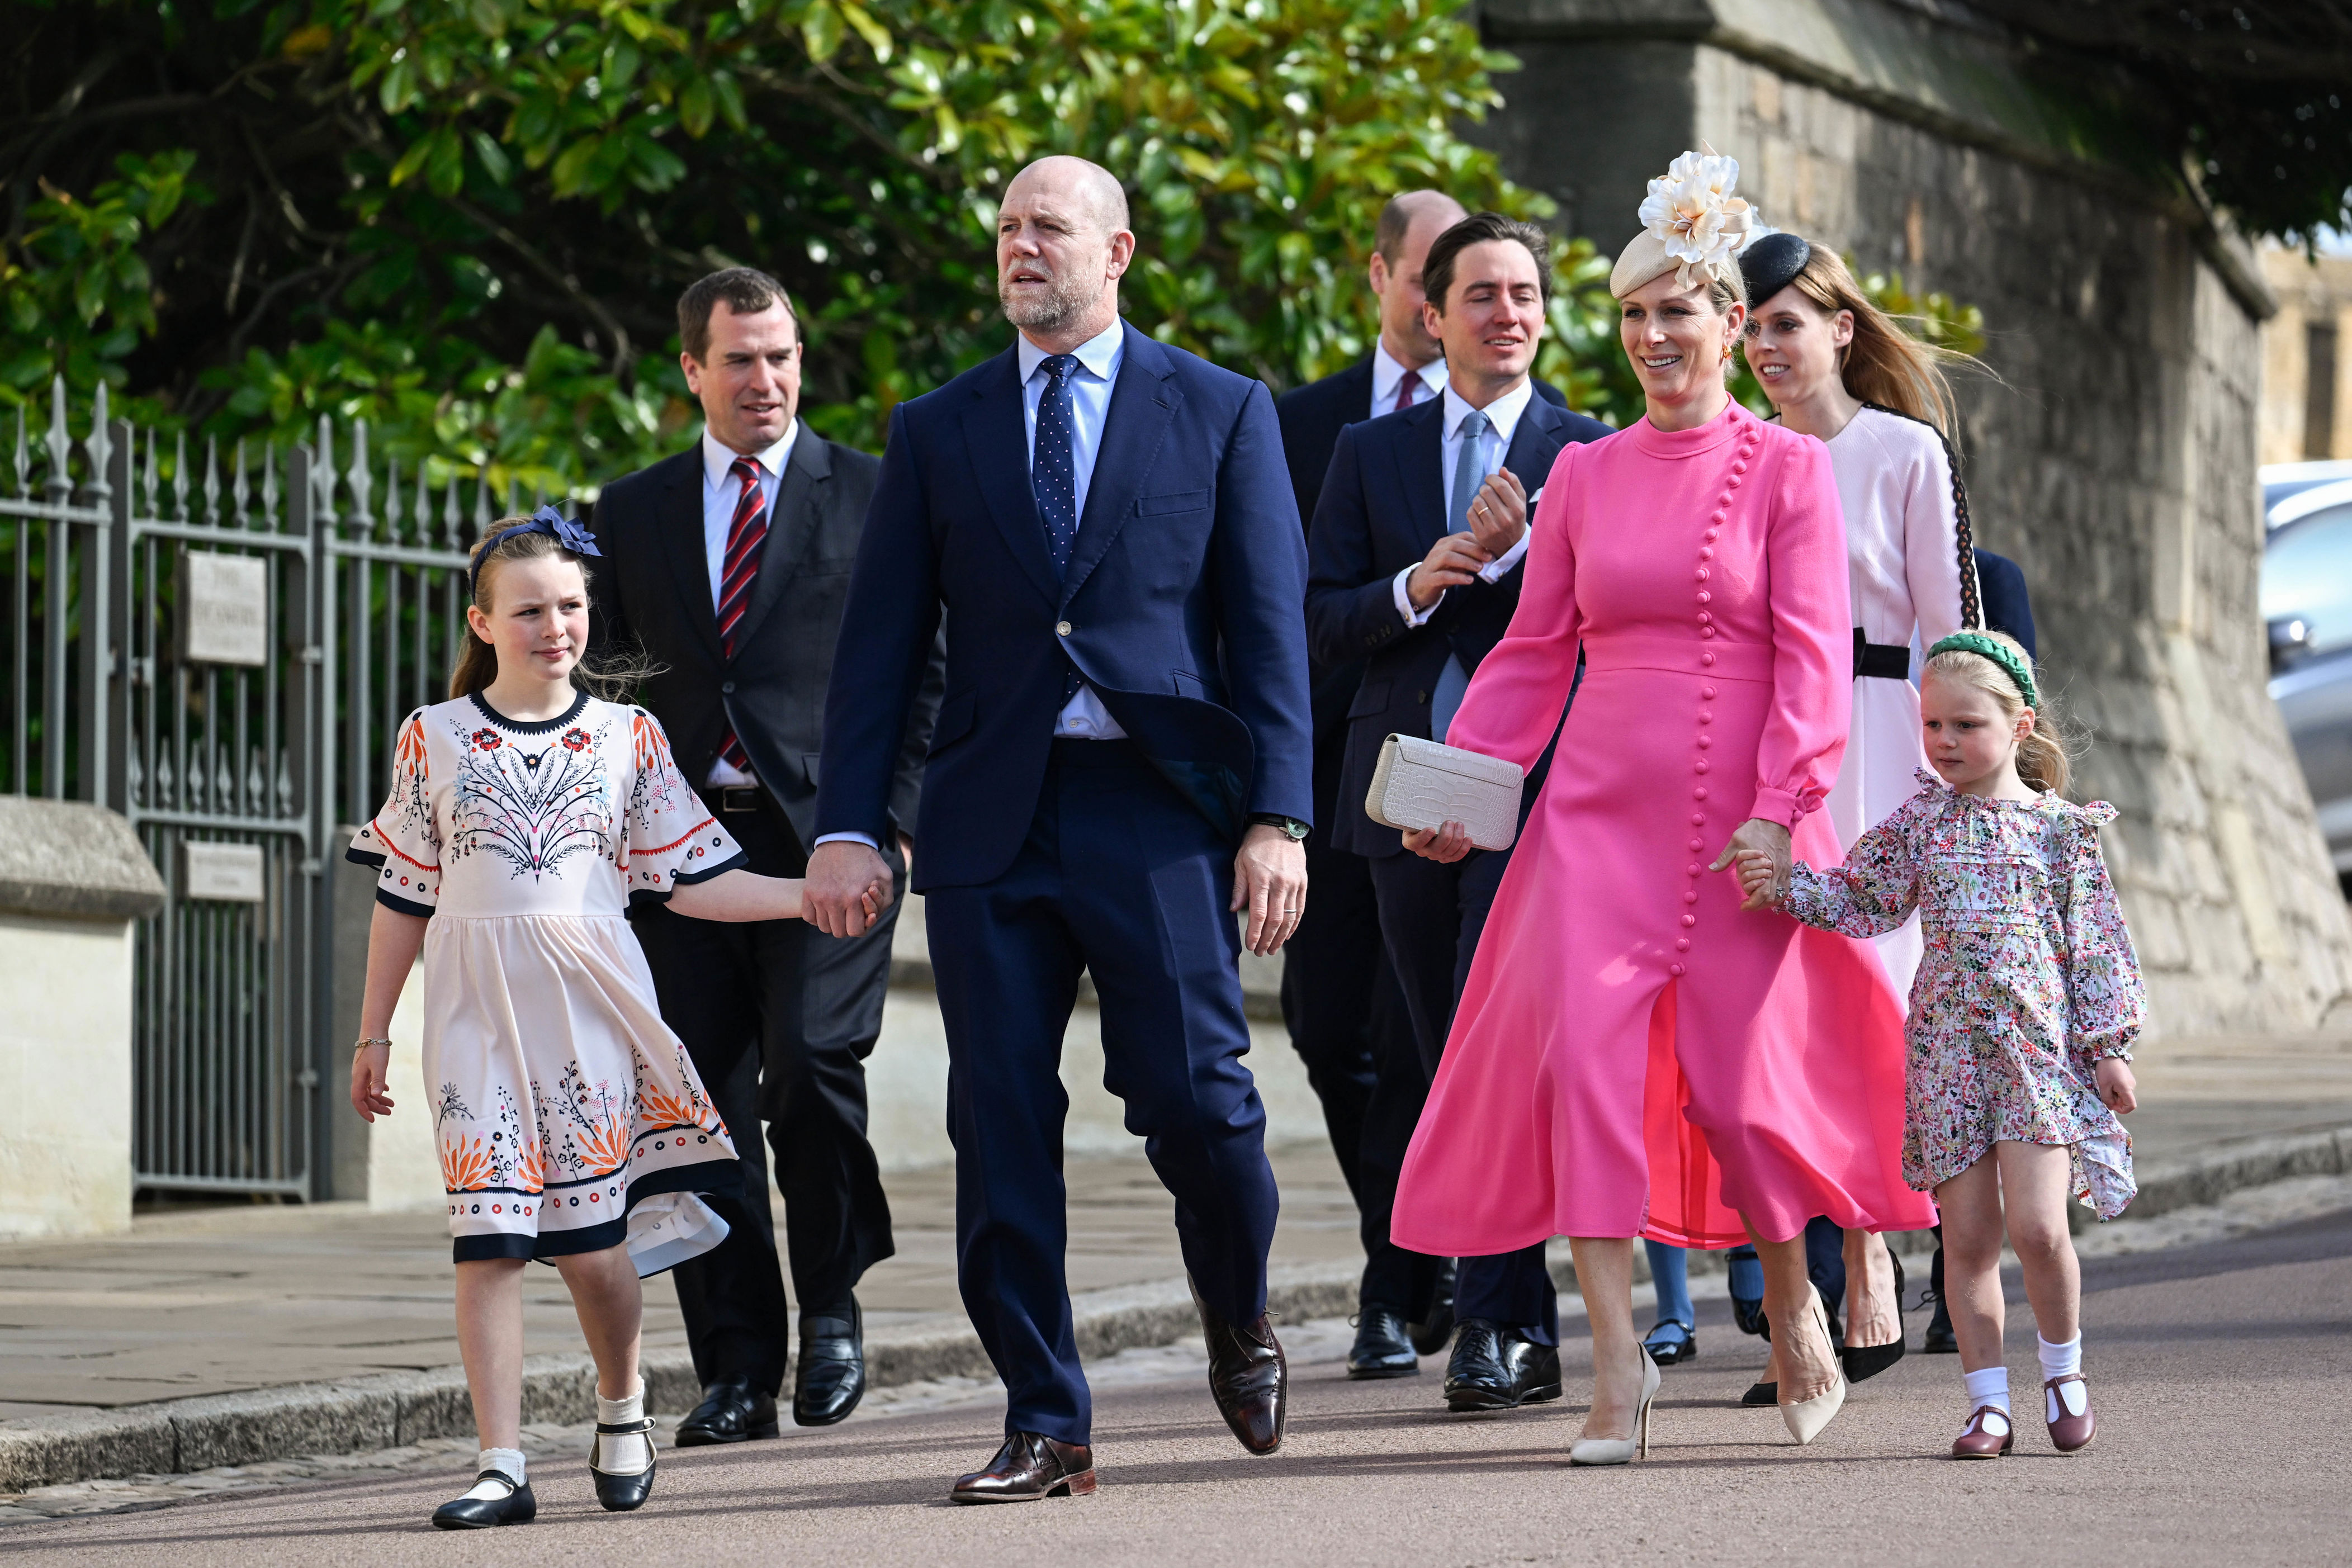 <p>Zara Phillips, husband Mike Tindall and their two daughters -- Mia Grace Tindall and Lena Elizabeth Tindall -- led a group of royals including her brother, Peter Phillips, and their cousin, Princess Beatrice, plus her husband, Edoardo Mapelli Mozzi, to the Easter Mattins Service at St. George's Chapel at Windsor Castle in England on April 9, 2023.</p>